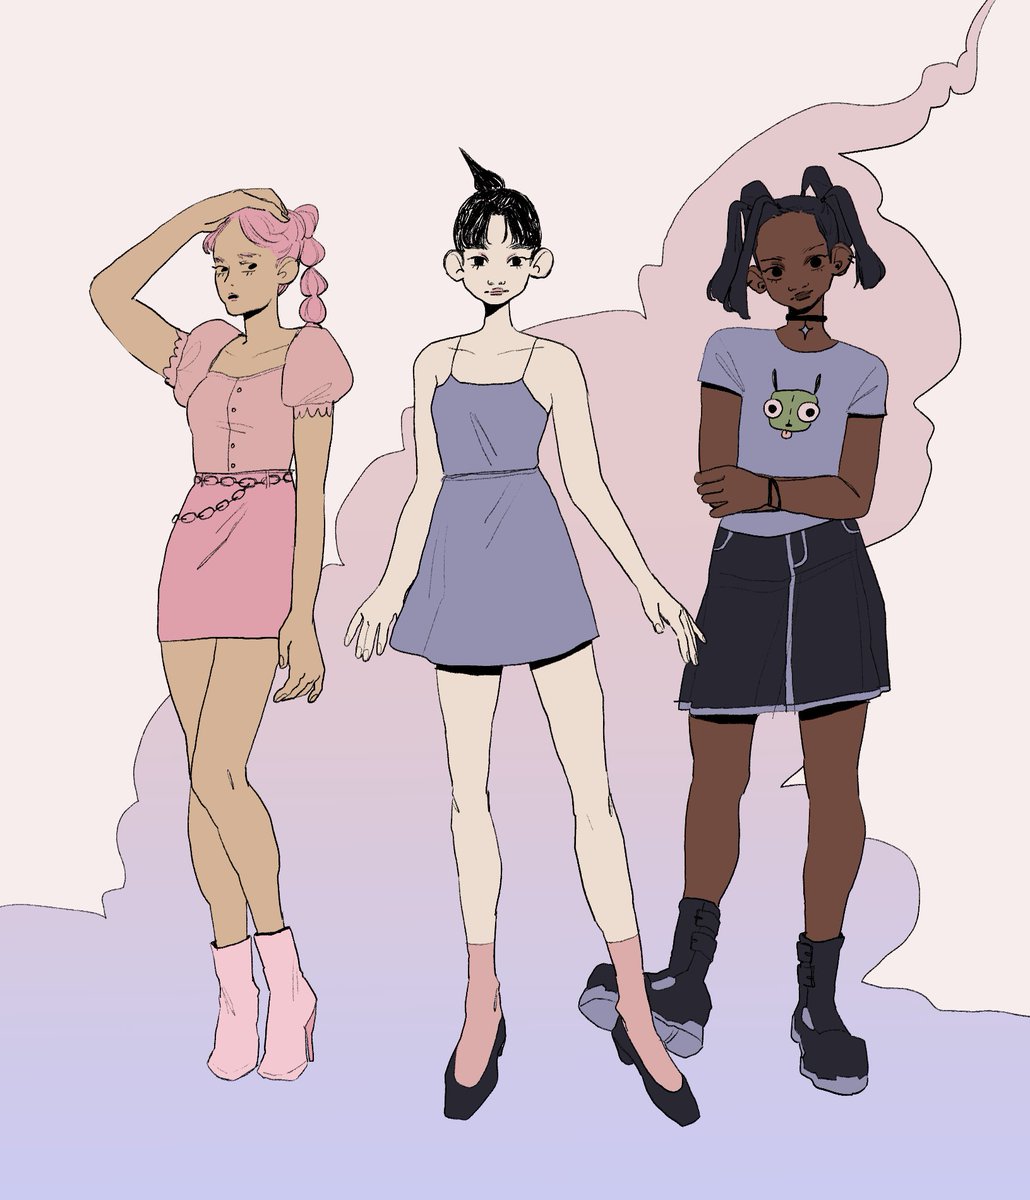 im graduating college this month and looking for a literary agent ! im interested in teen/YA comics, scifi/fantasy, and cool girls ! I would love to illustrate covers, graphic novels, and i have my own i want to pitch to publishers ! 
https://t.co/Fo85kQ1osJ 